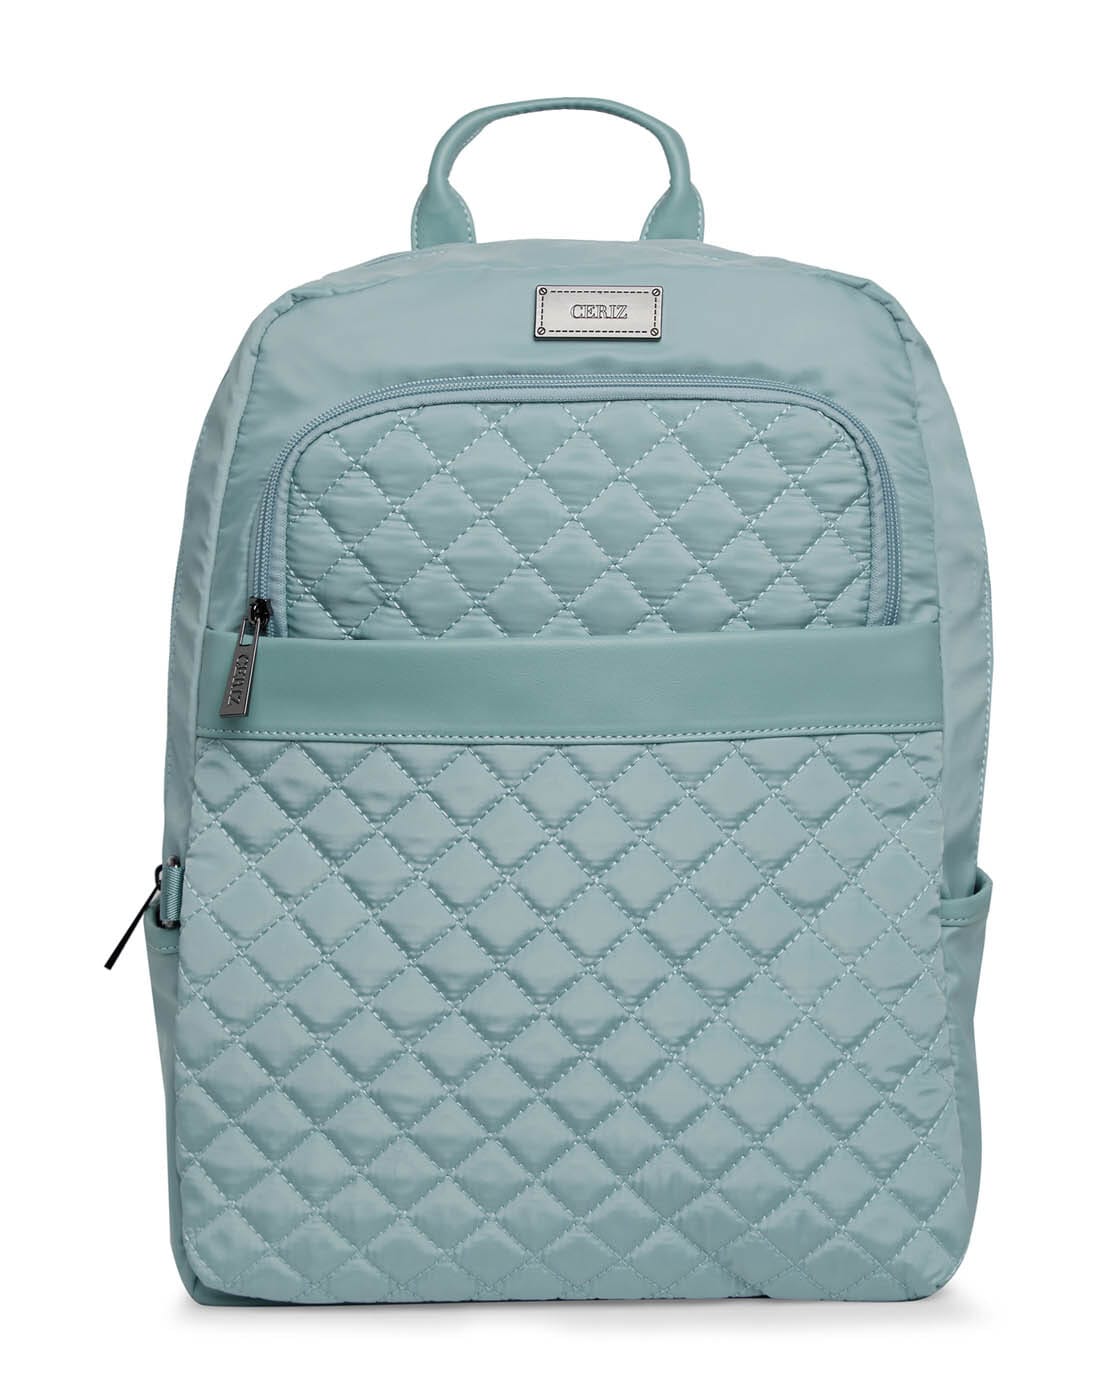 Ceriz Elettra Casual Light Pink Backpack Buy Ceriz Elettra Casual Light  Pink Backpack Online at Best Price in India  Nykaa